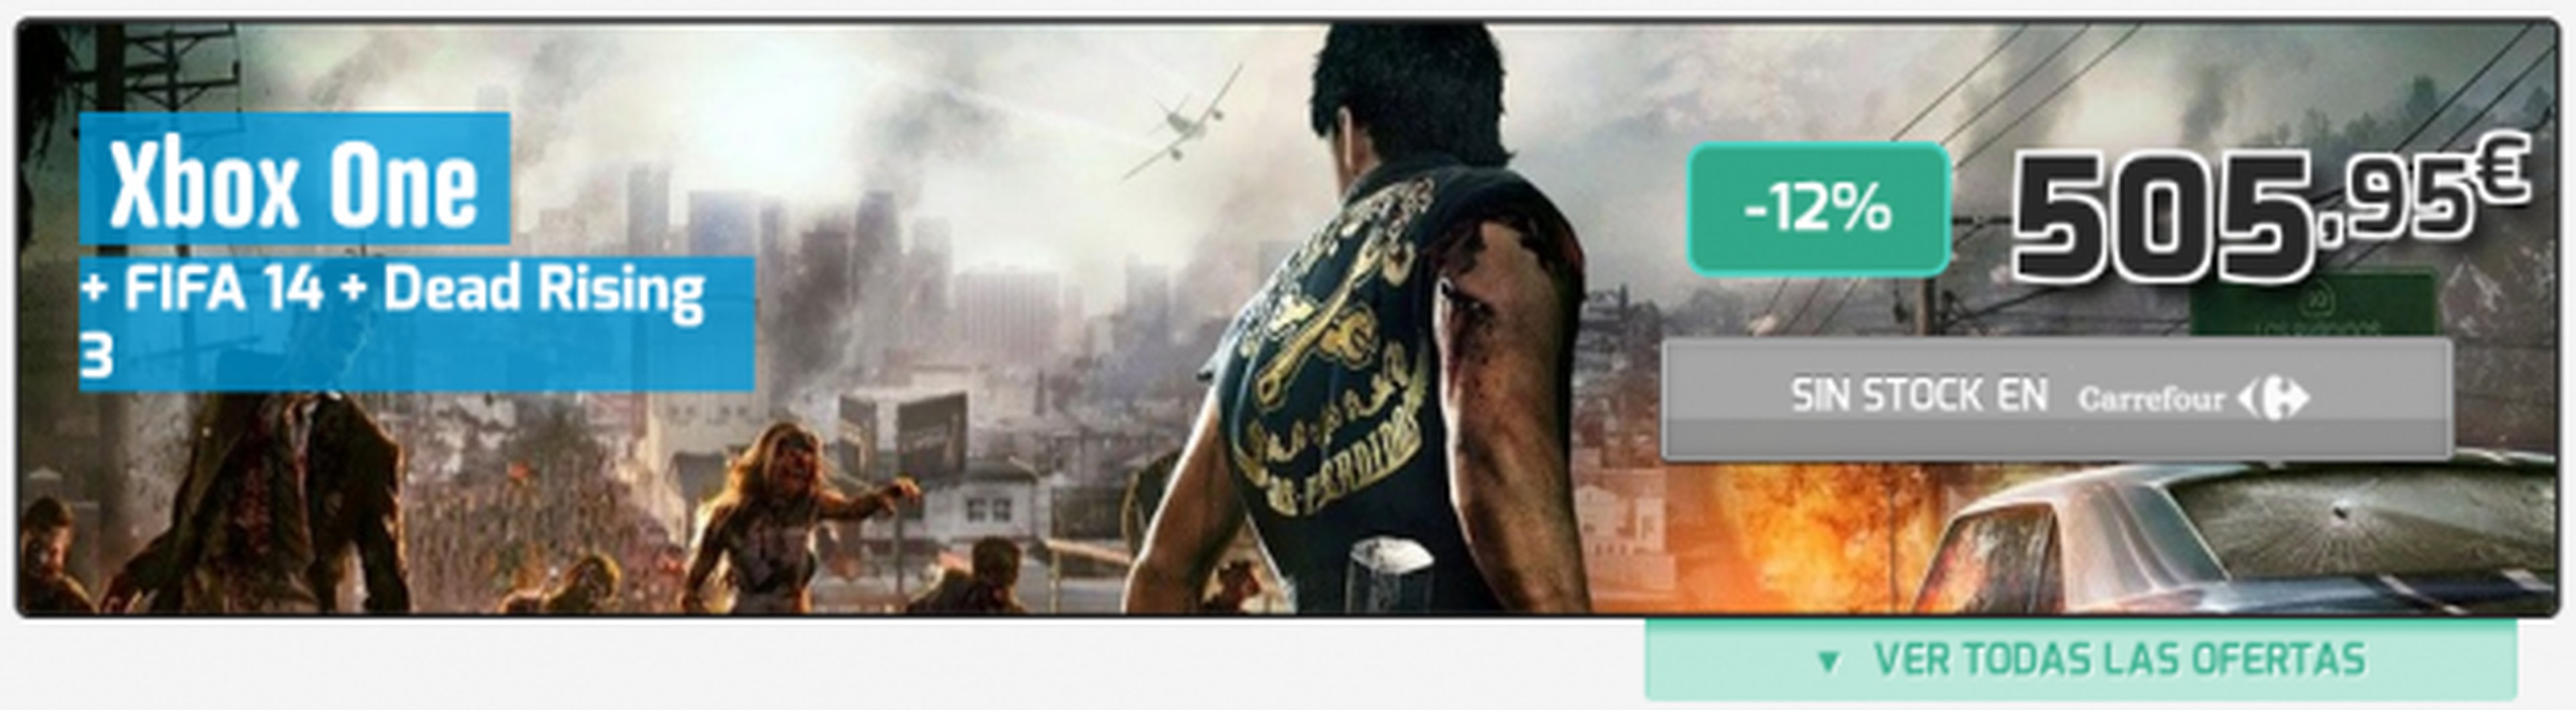 pack xbox one con fifa y dead rising 3